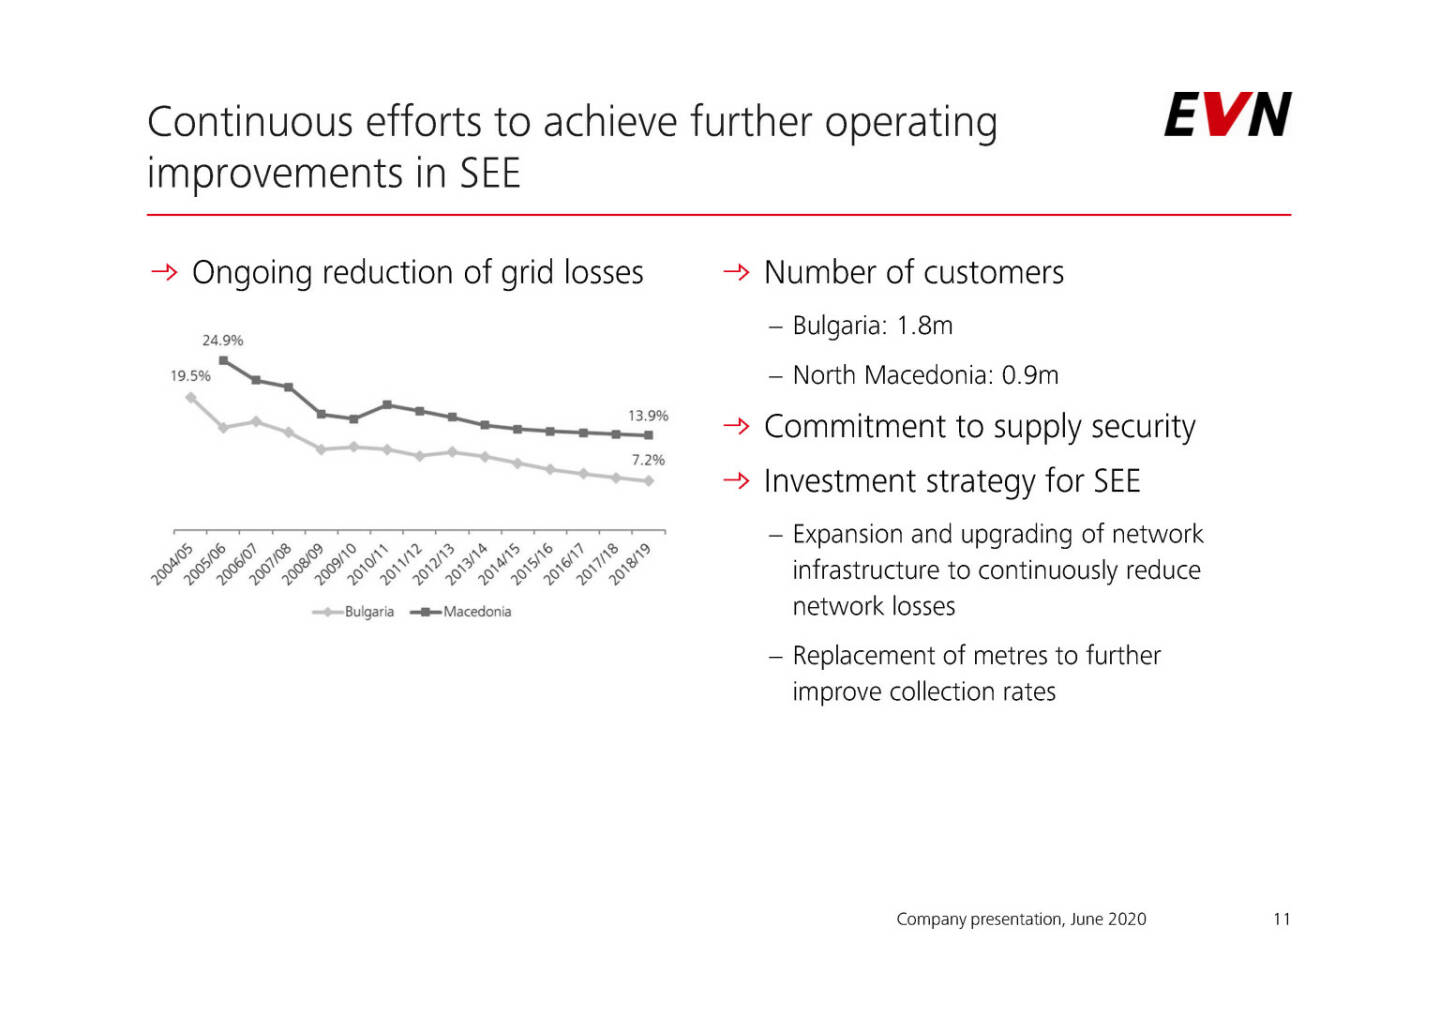 EVN - Continuous efforts to achieve further operating improvements in SEE